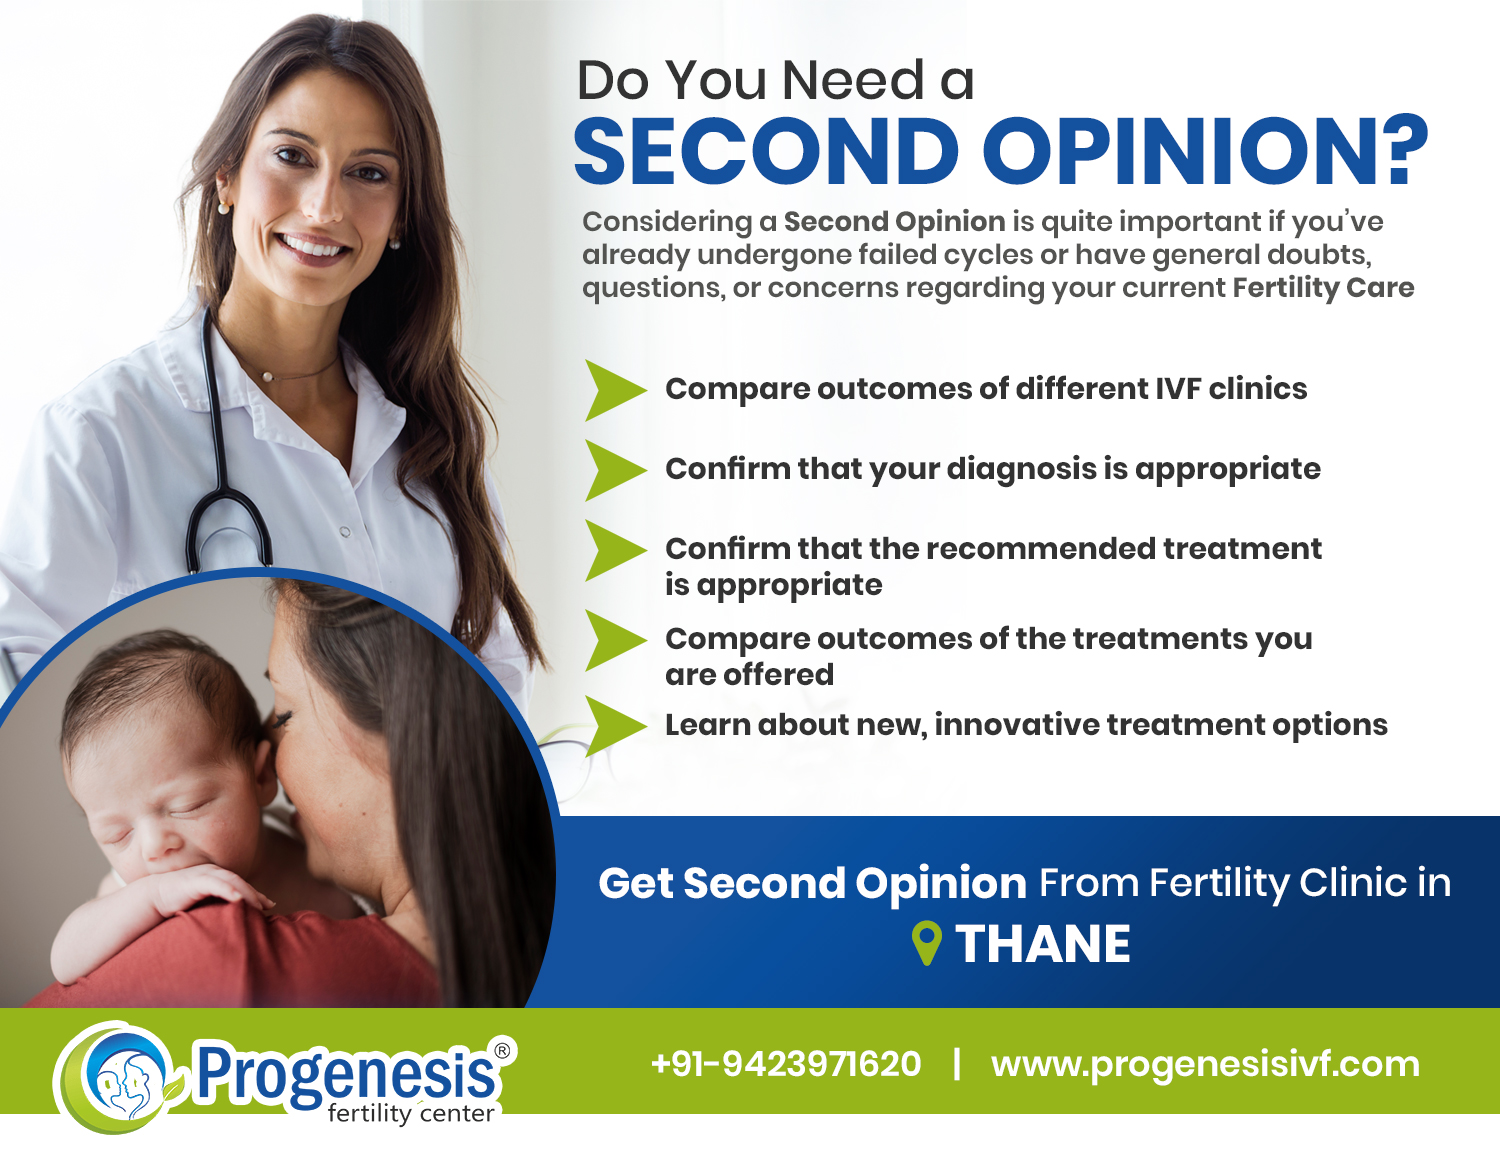 Second opinion for IVF & infertility